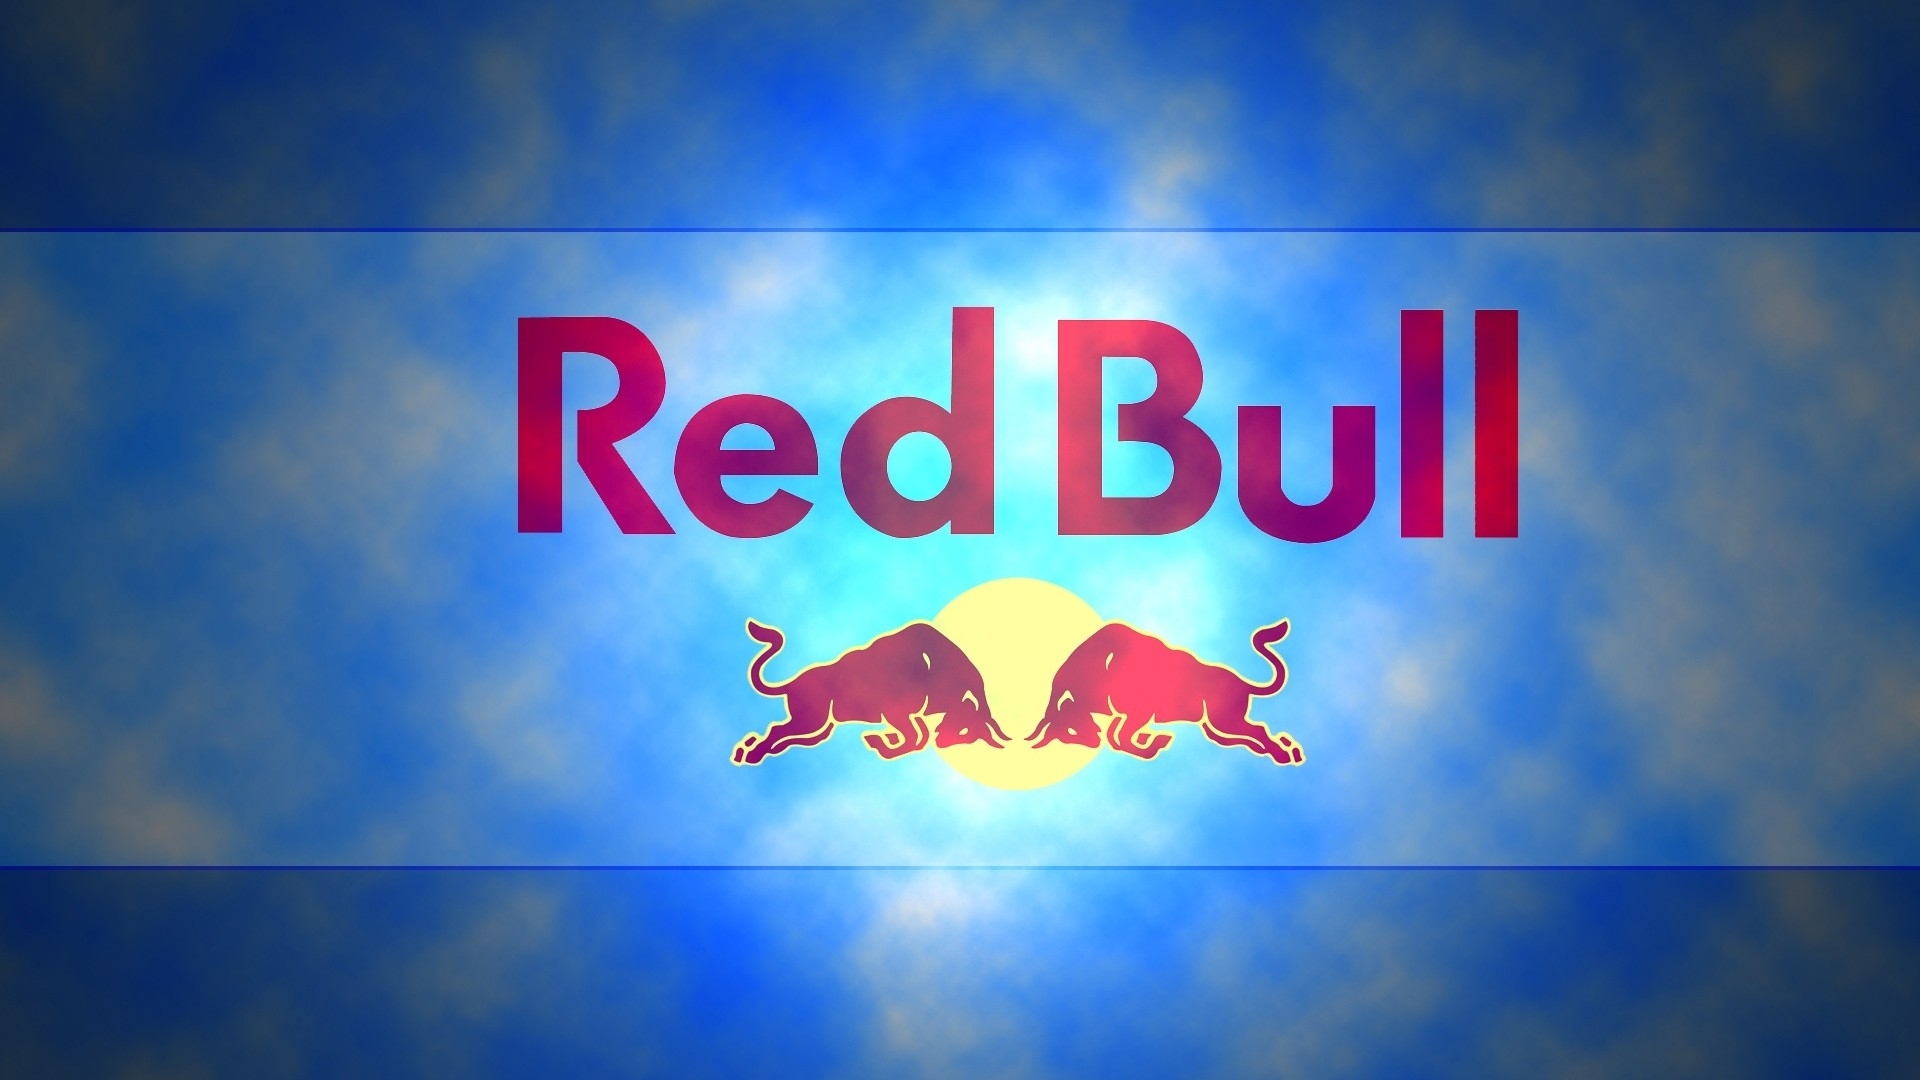 http://rozup.ir/up/1080wallpaper/Pictures/red_bull_energy_drink_firm_66145_1920x1080.jpg